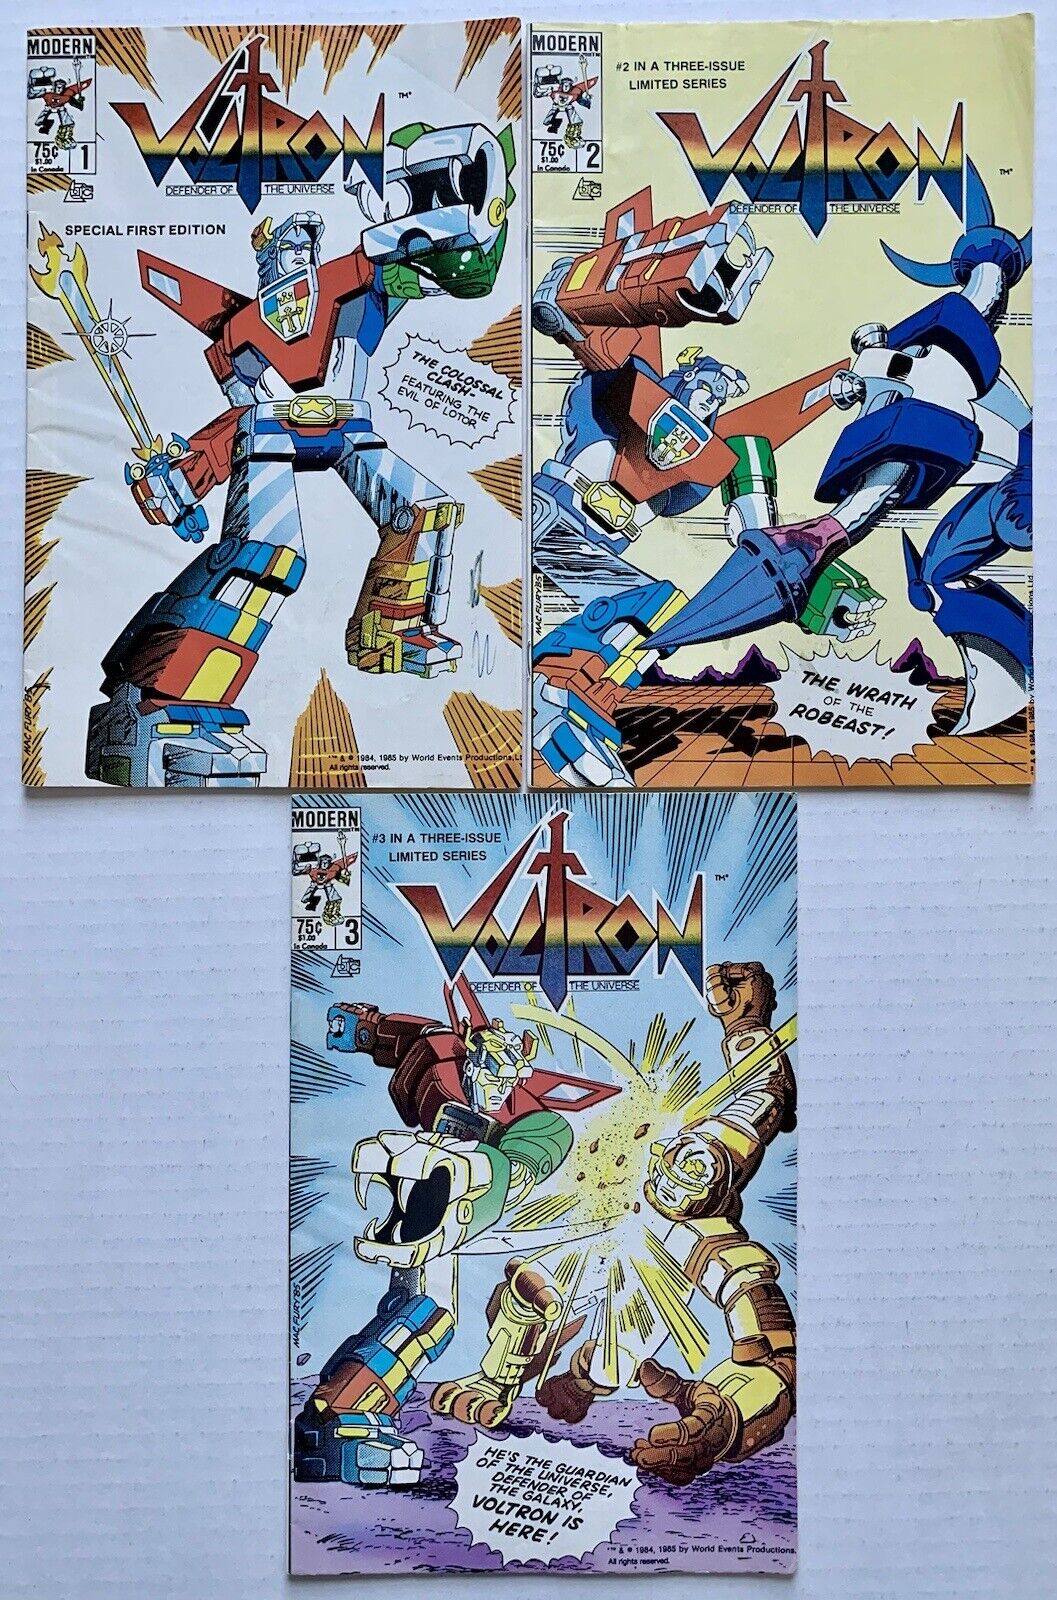 Voltron #1 #2 #3 (1984) Defender of the Universe -3 Issues (FN+/5.5-6.0)-VINTAGE